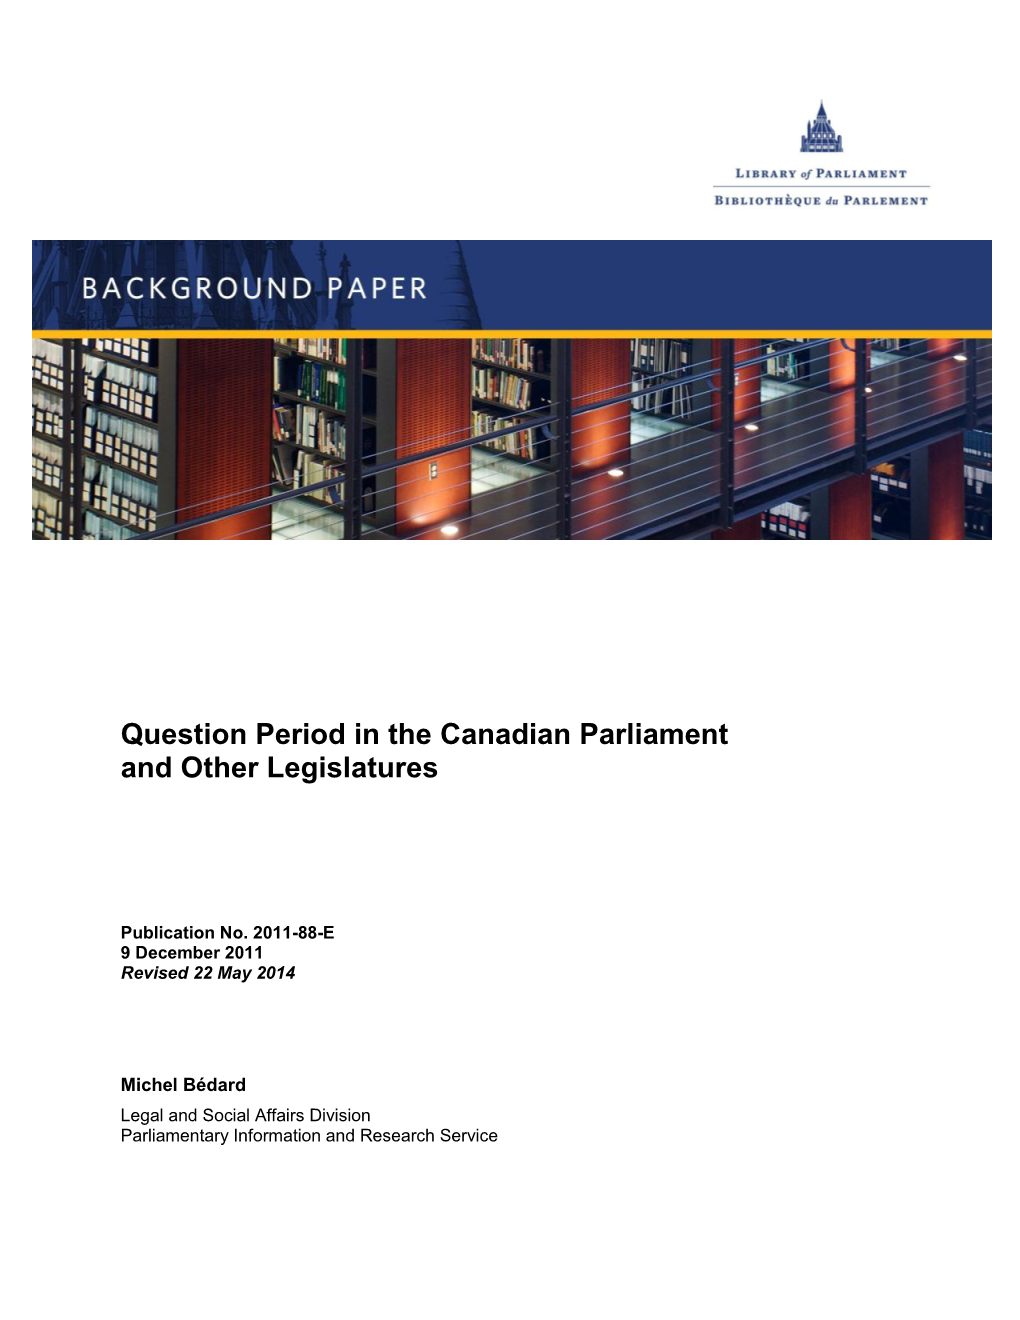 Question Period in the Canadian Parliament and Other Legislatures